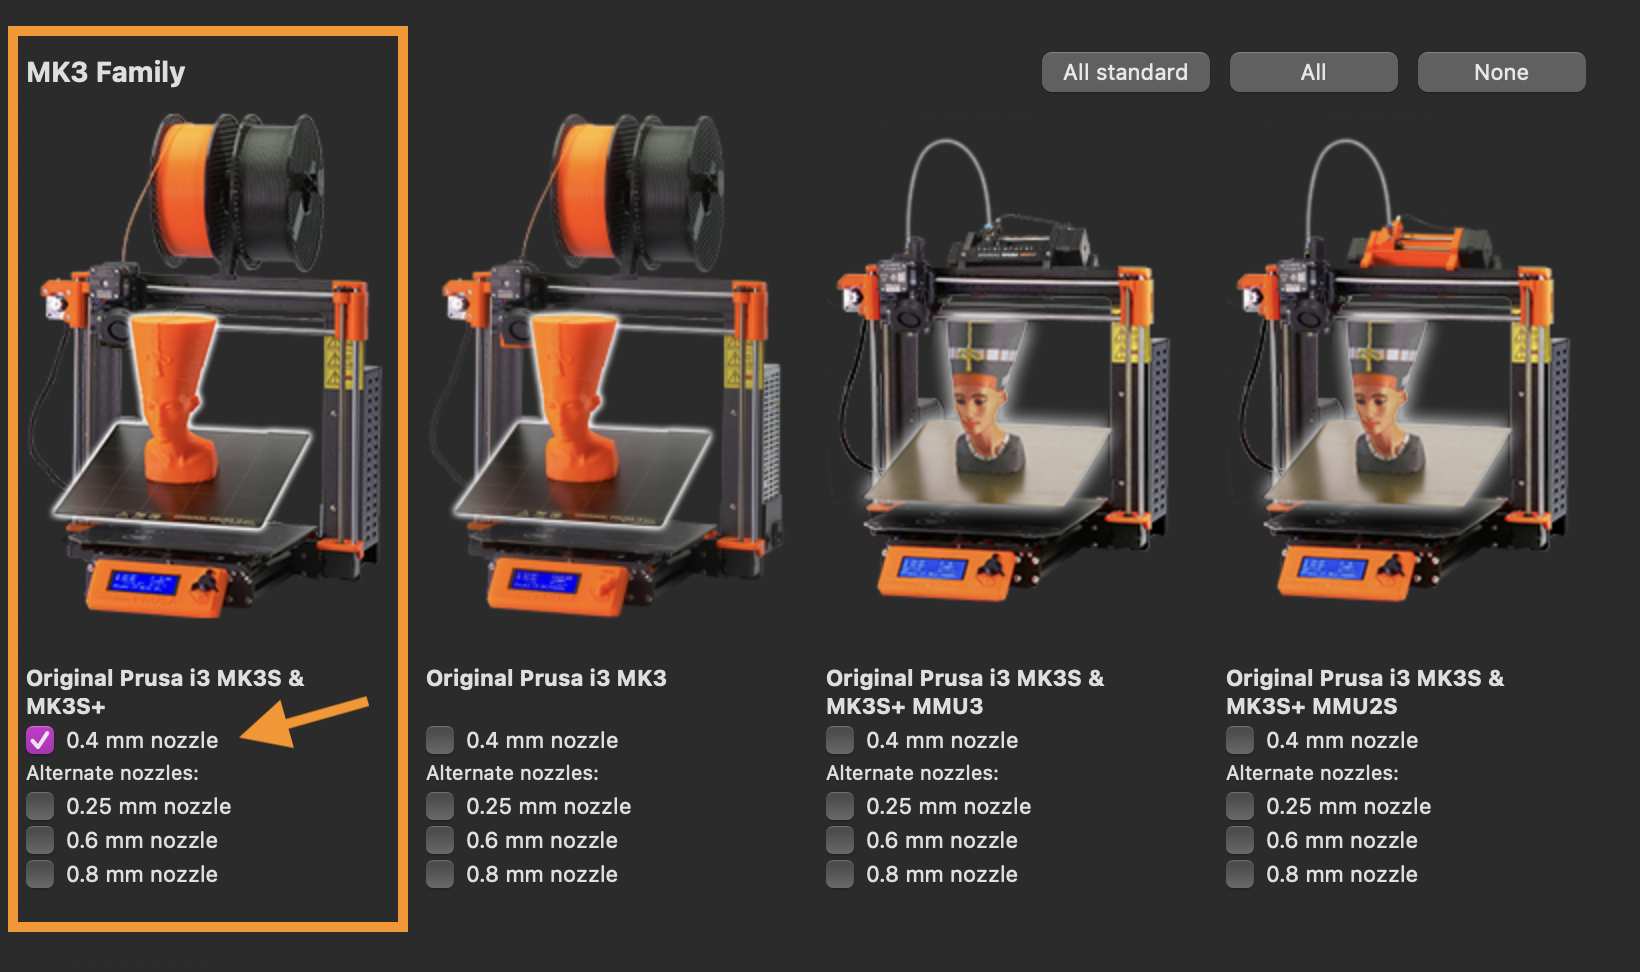 A screenshot of the MK3 Family section on the Prusa FFF Step in PrusaSlicer Configuration Assistant. There is a box around Original Prusa i3 MK3S & MK3S+ and an arrow pointing to the check box for 0.4mm nozzle indicating that you should check this box